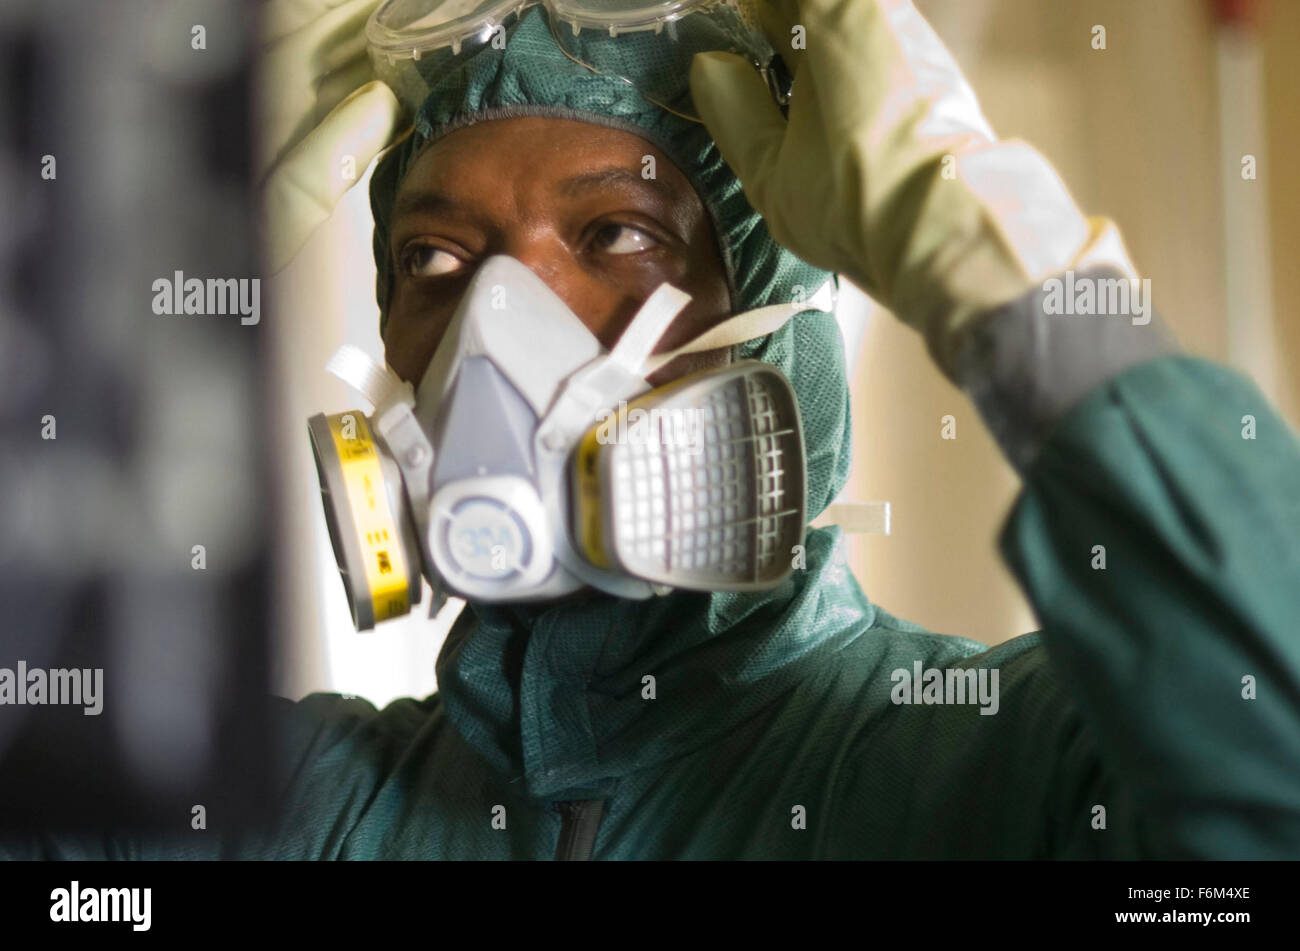 RELEASE DATE: May 27, 2008. MOVIE TITLE: Cleaner. STUDIO: Odeon. PLOT: A former cop who now earns a wage as a crime scene cleaner unknowingly participates in a cover-up at his latest job. PICTURED: SAMUEL L. JACKSON as Tom Carver. Stock Photo